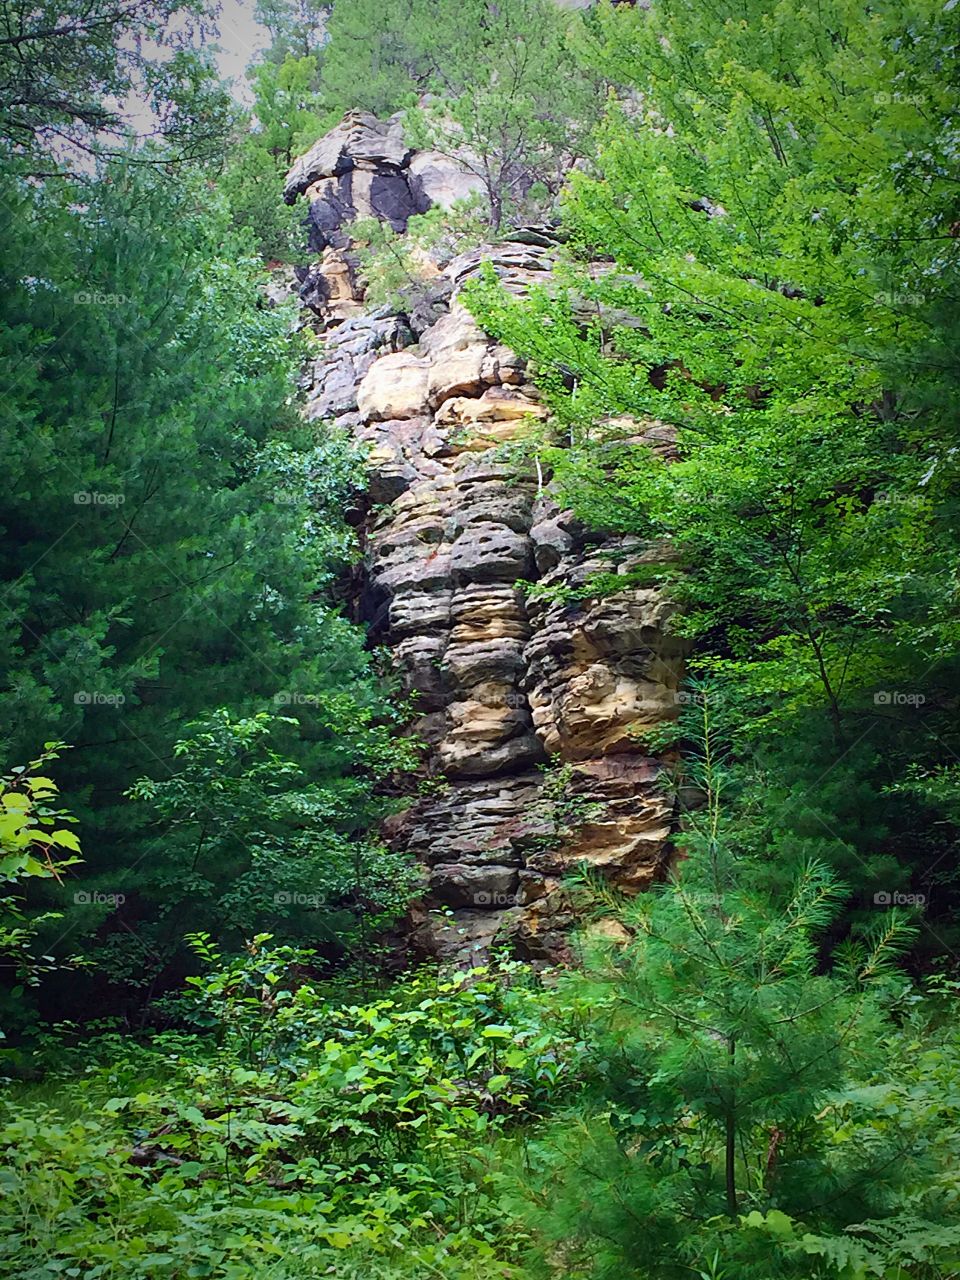 Mill Bluff Erosion. One example of erosion occurring in the sandstone and dolomite that makes up Mill Bluff at Mill Bluff State Park in WI.